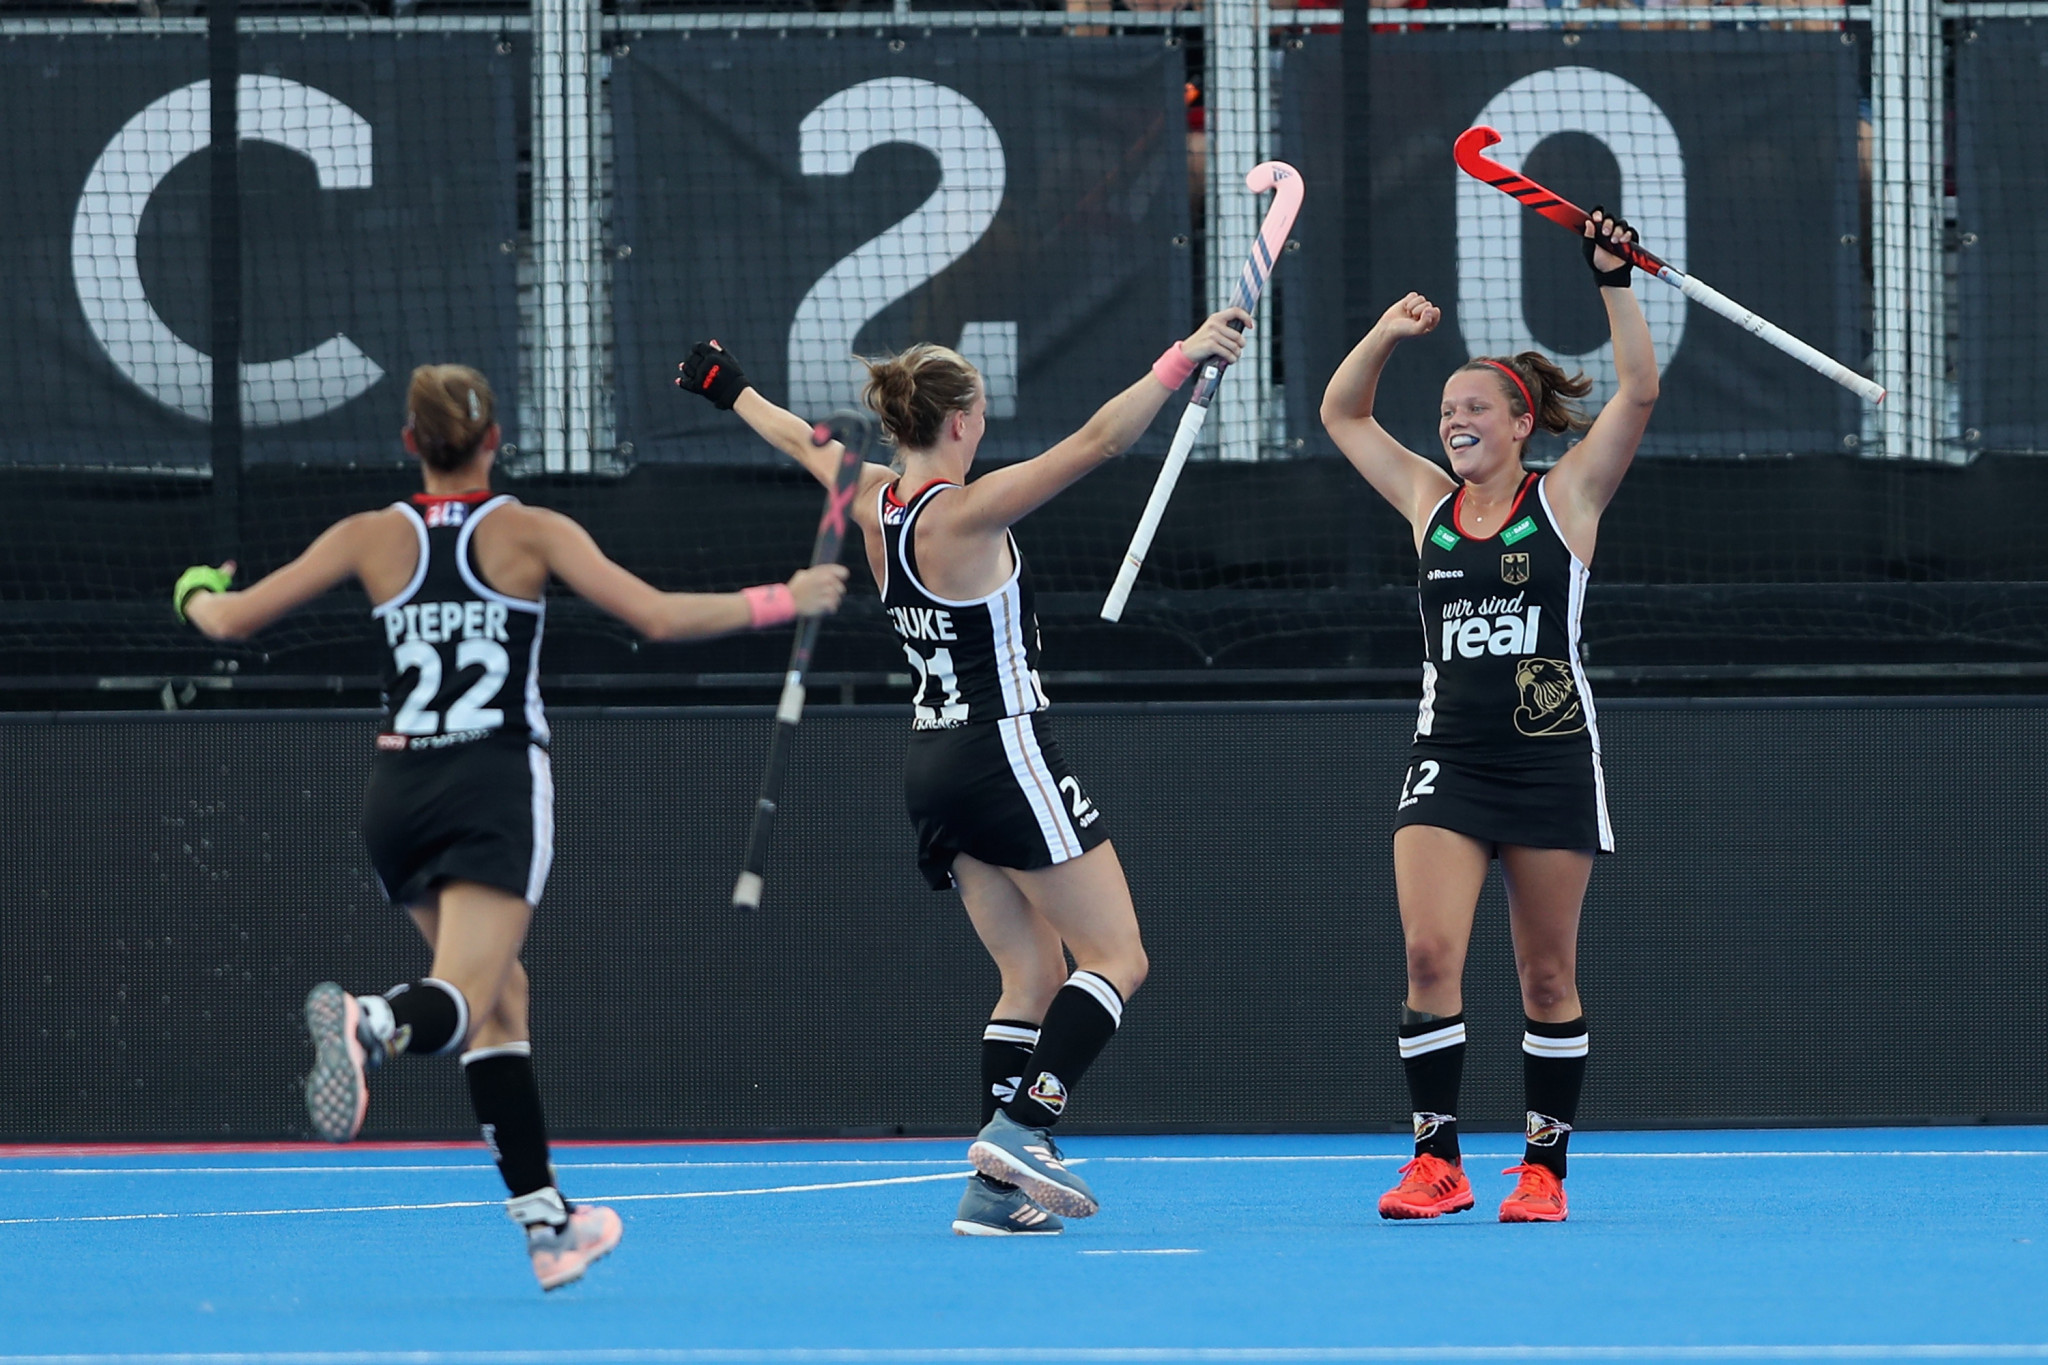 Germany are the only team to have six points from two games after beating Argentina today at the FIH Women's Hockey World Cup ©Getty Images